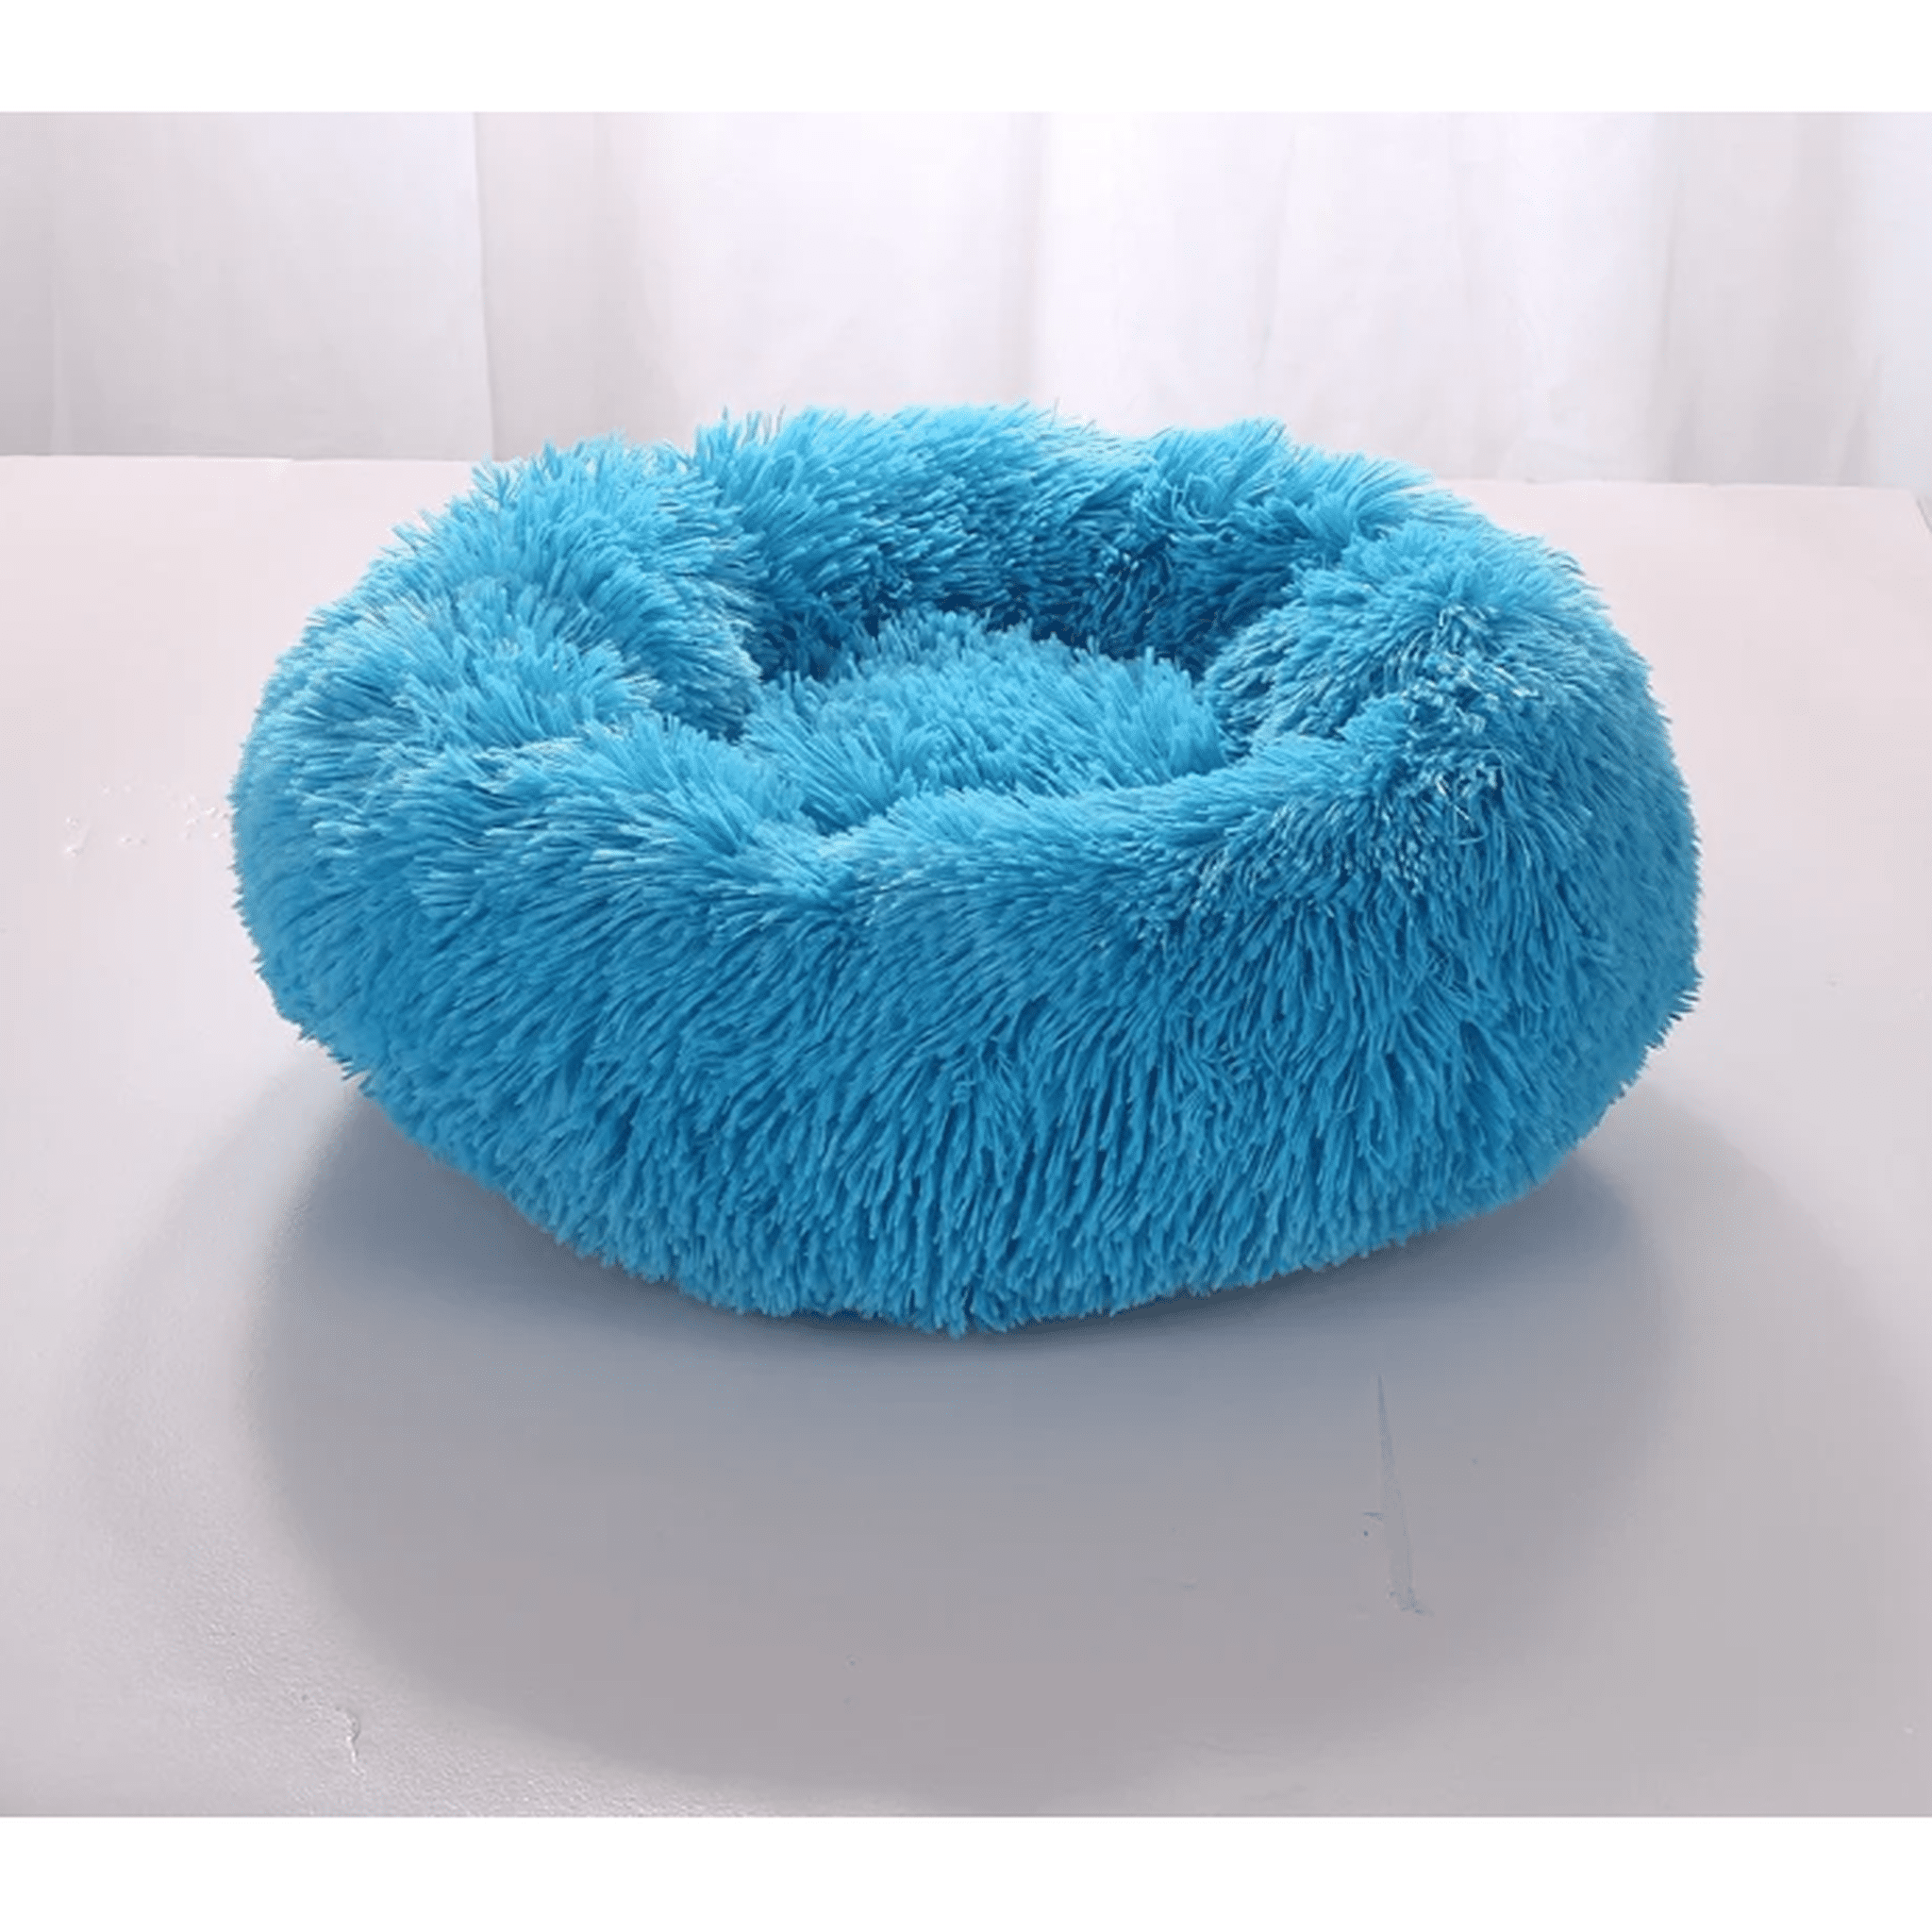 PytusBed™ Comfort+ Bed- Assorted Colors Bark Bliss Boutique